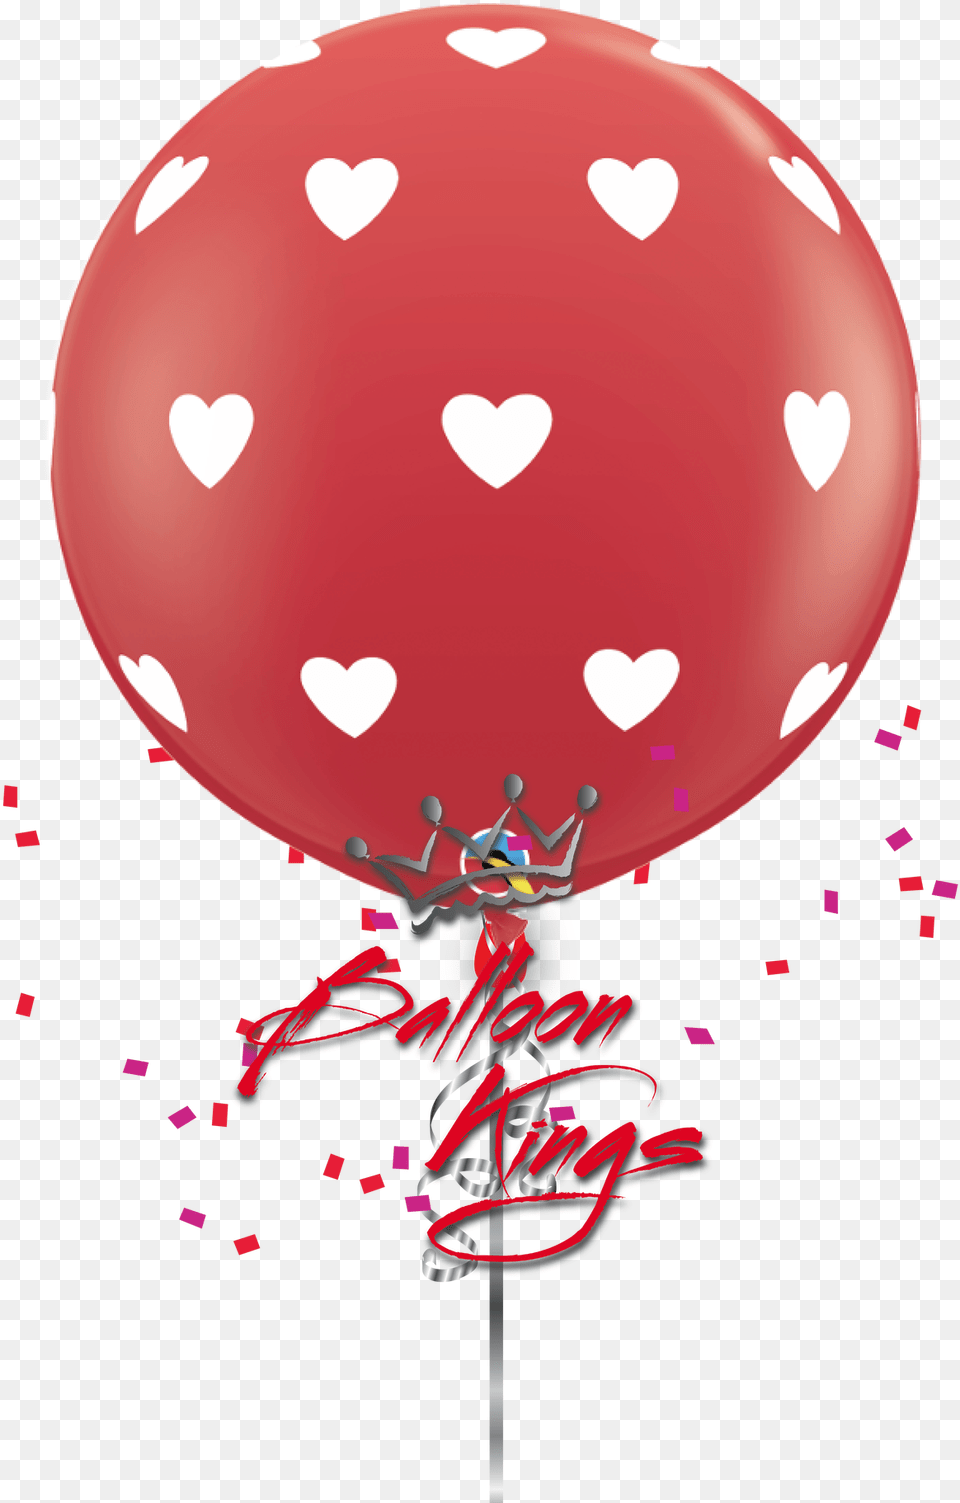 Latex Hearts Balloon With Hearts Free Transparent Png